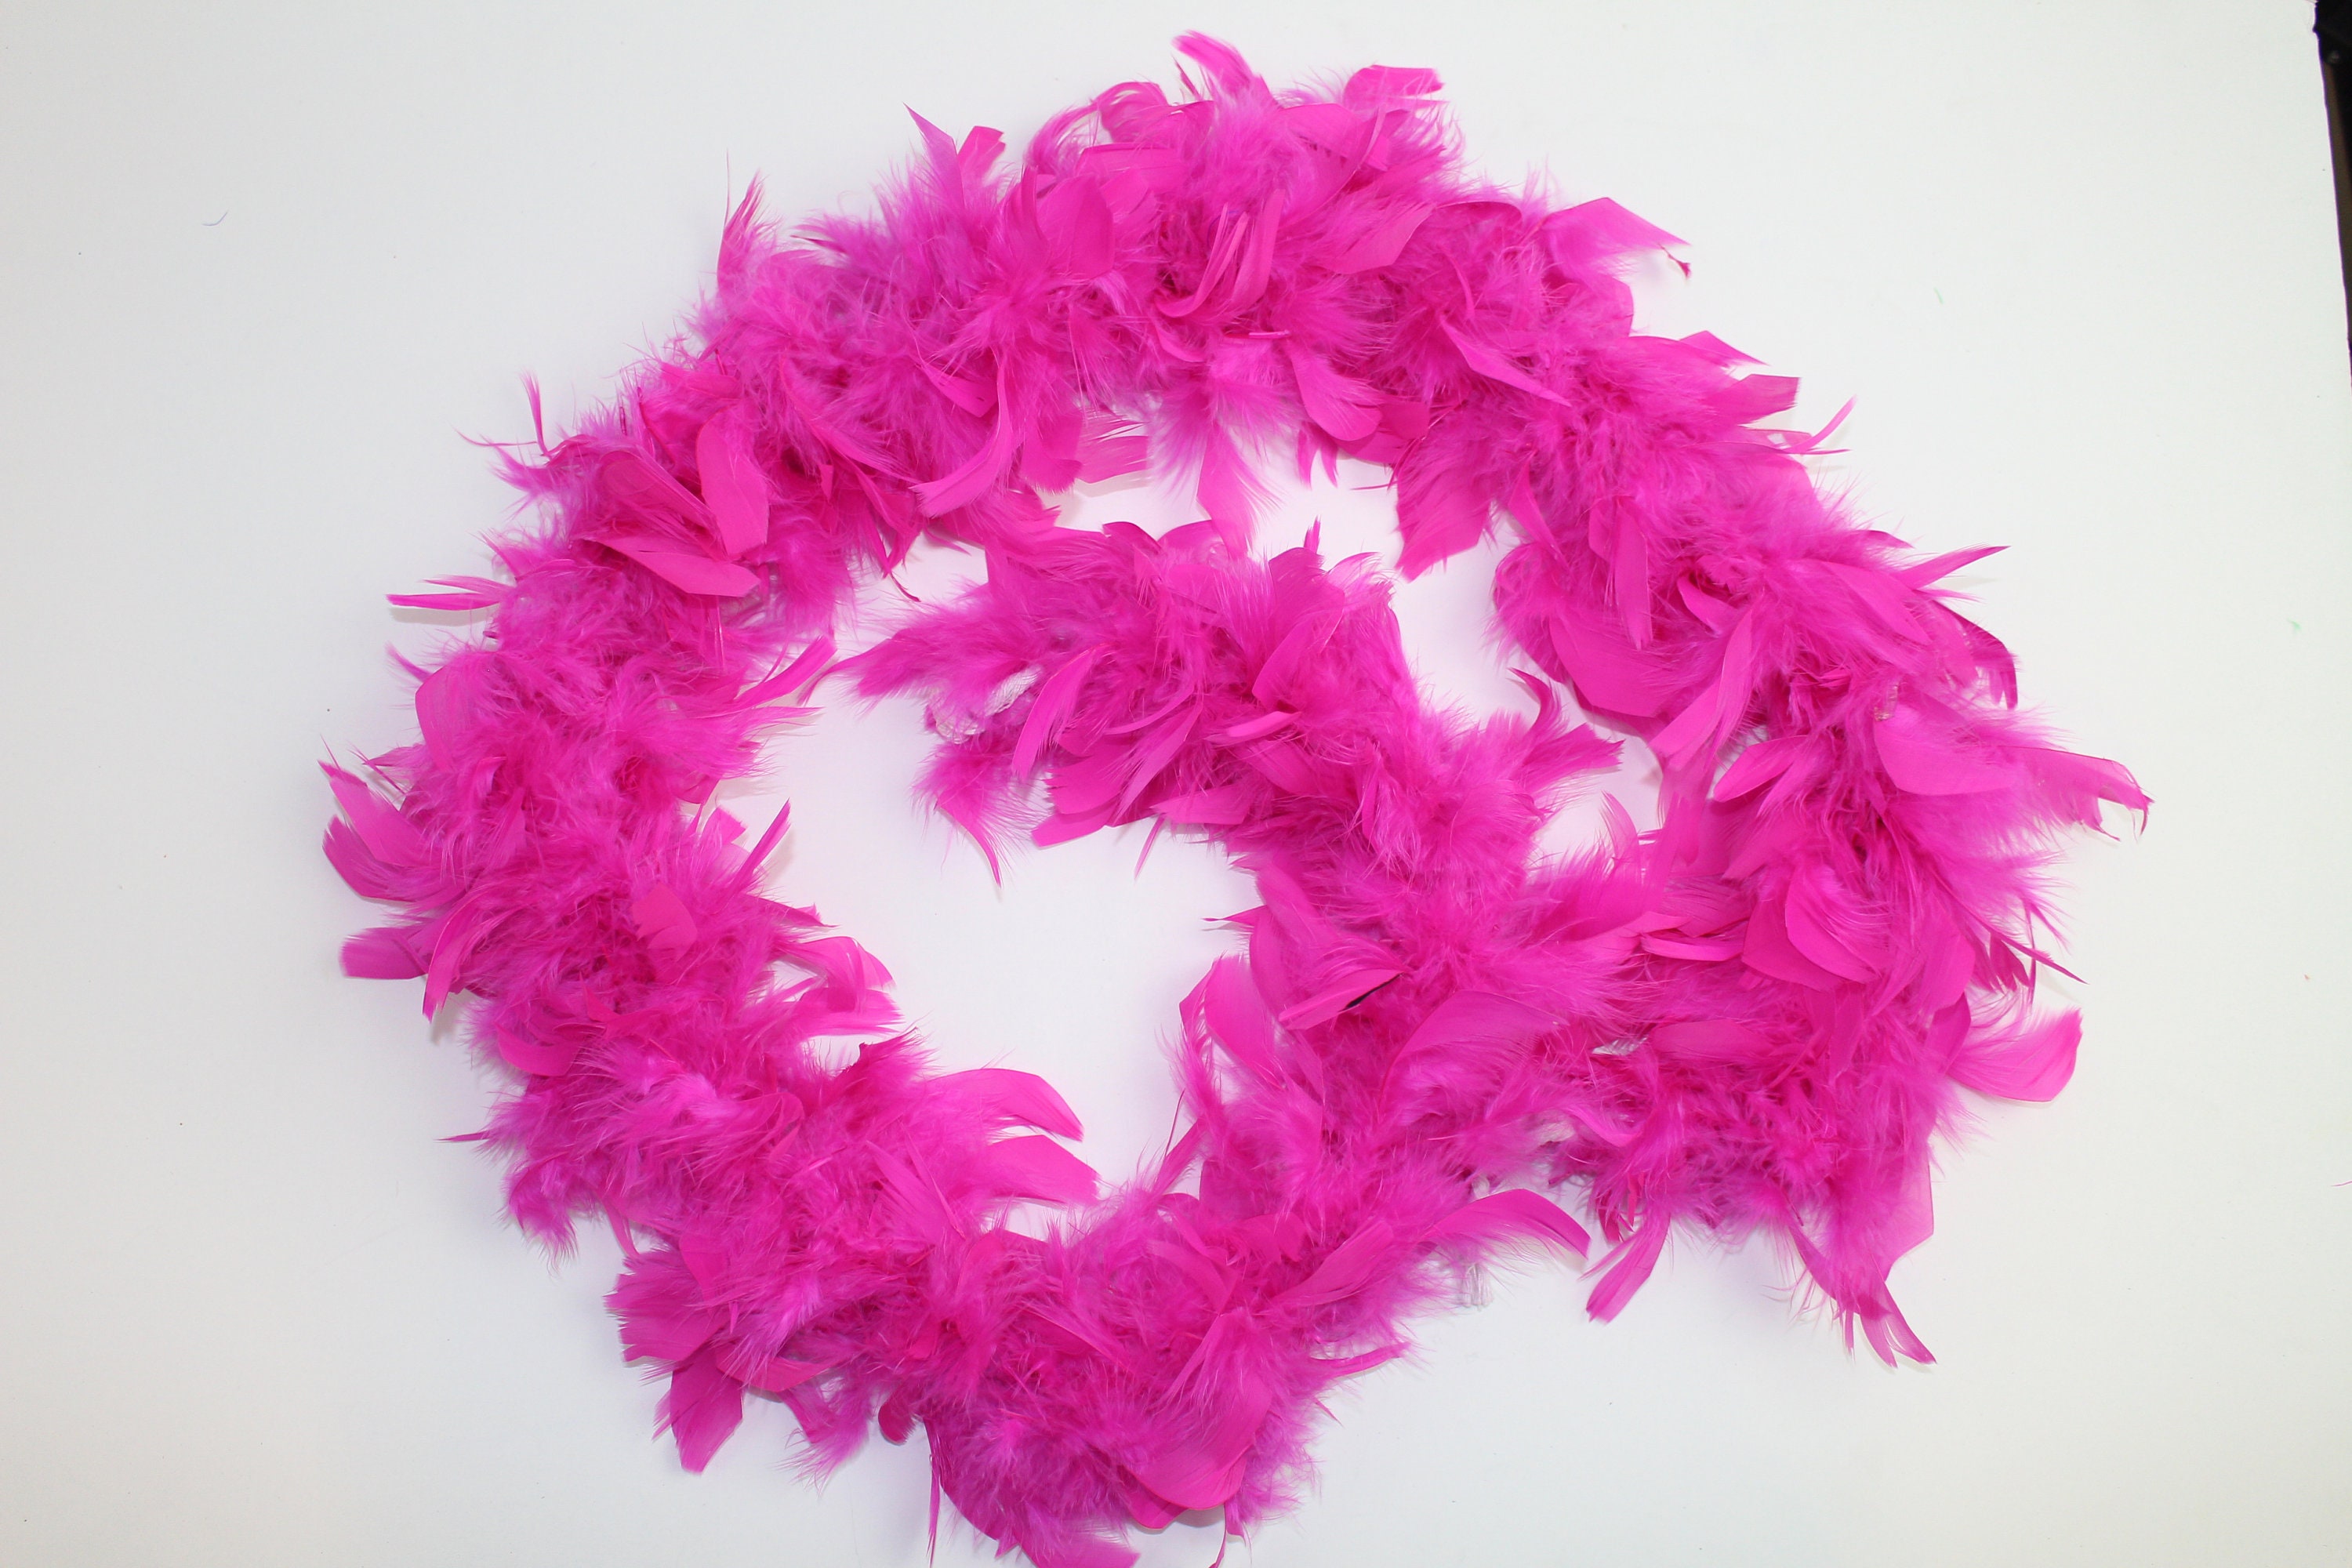 Larryhot Hot Pink Feather Boa - 80g 2yards Feather Boas for Women,Dancing Craftting Party Dress Up and Festival Decoration (80g - Hot Pink)